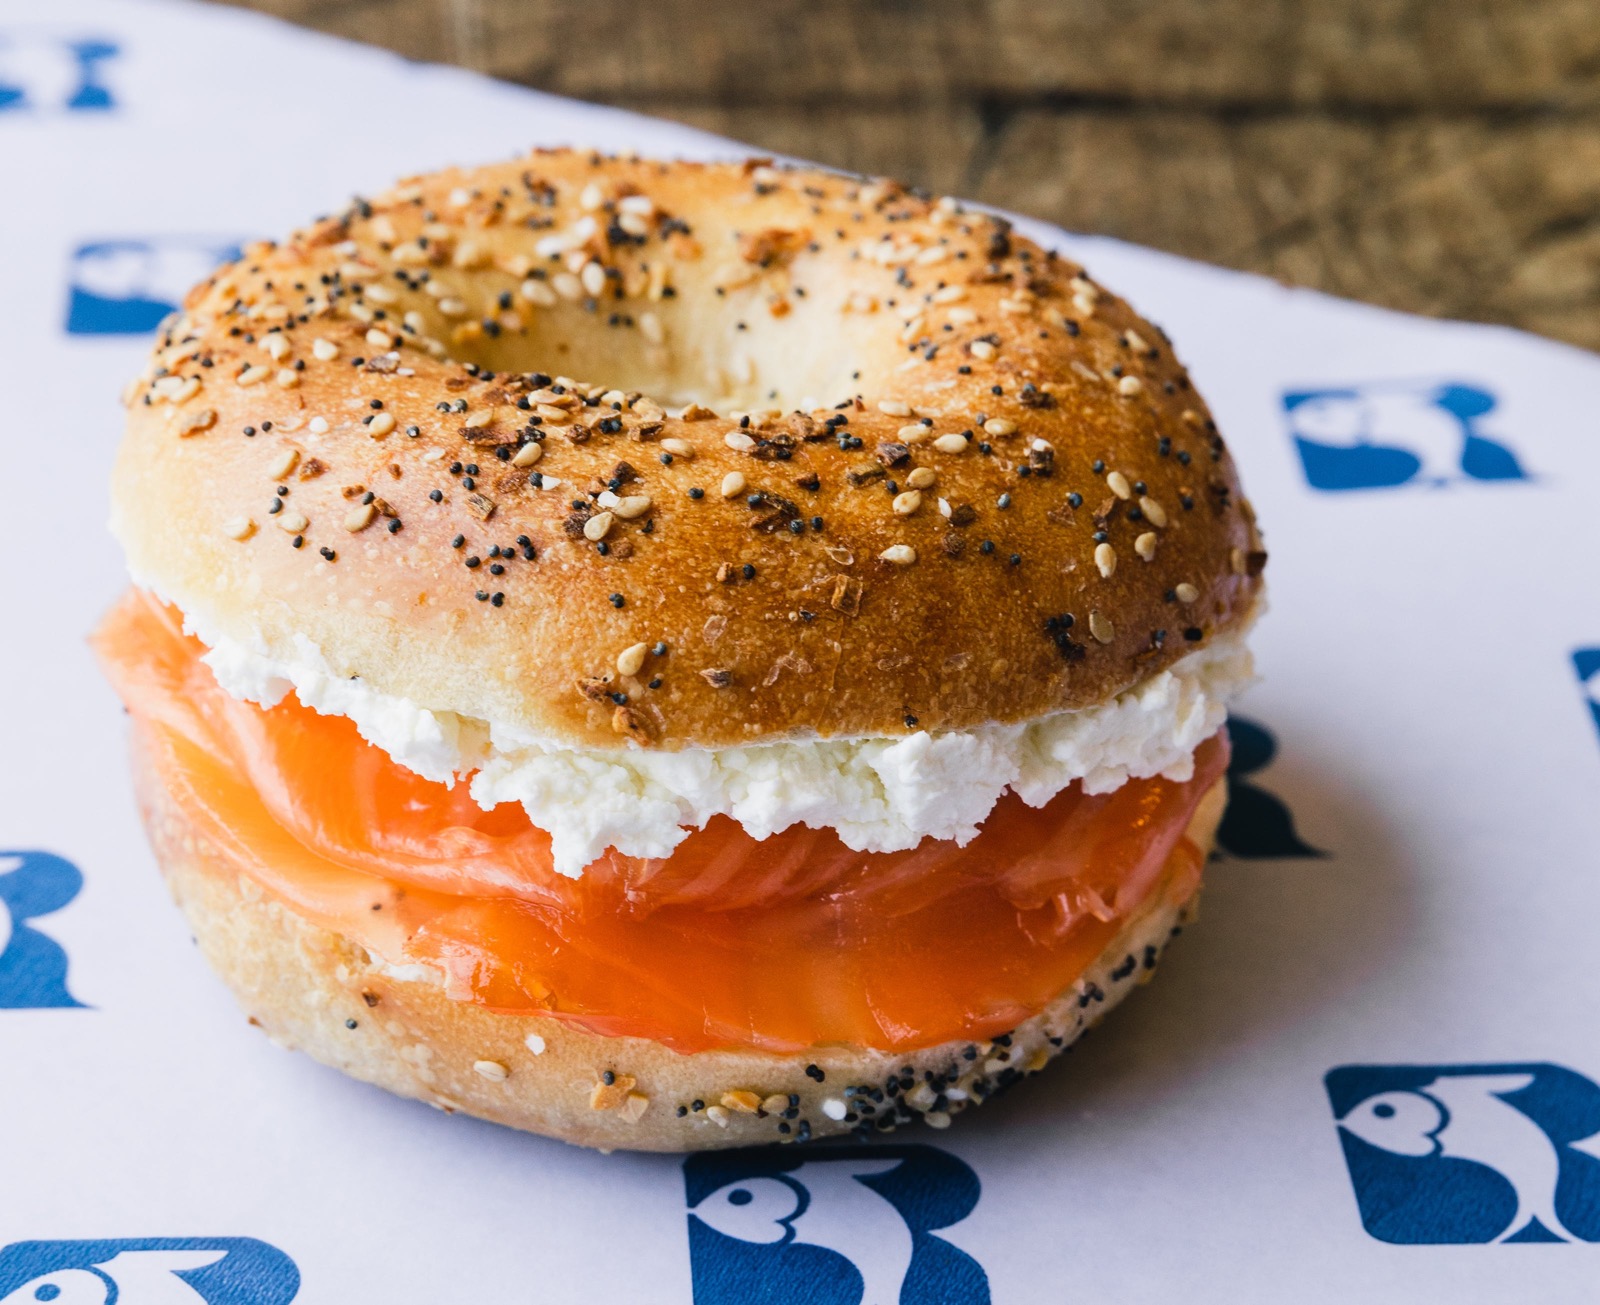 NYC Trip Planning Quiz 🗽: Can We Guess Your Age? Bagel with lox and cream cheese from Russ & Daughters